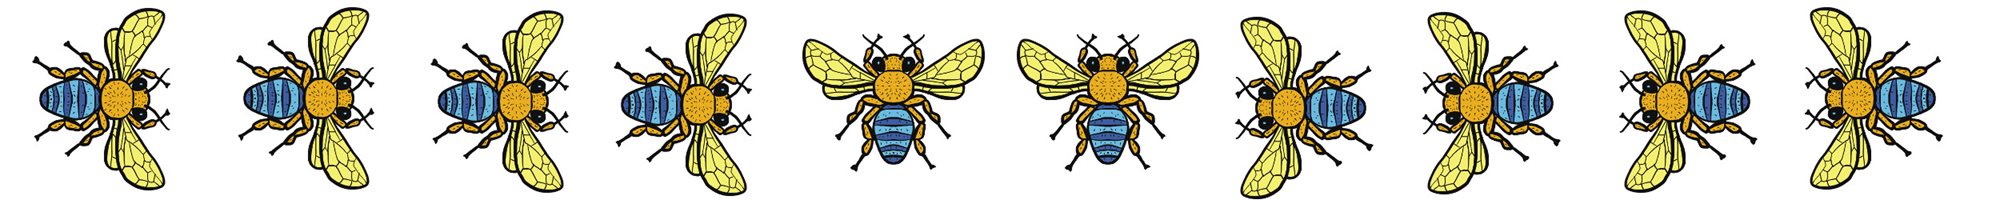 Cartoon strip of Blue Banded bees 